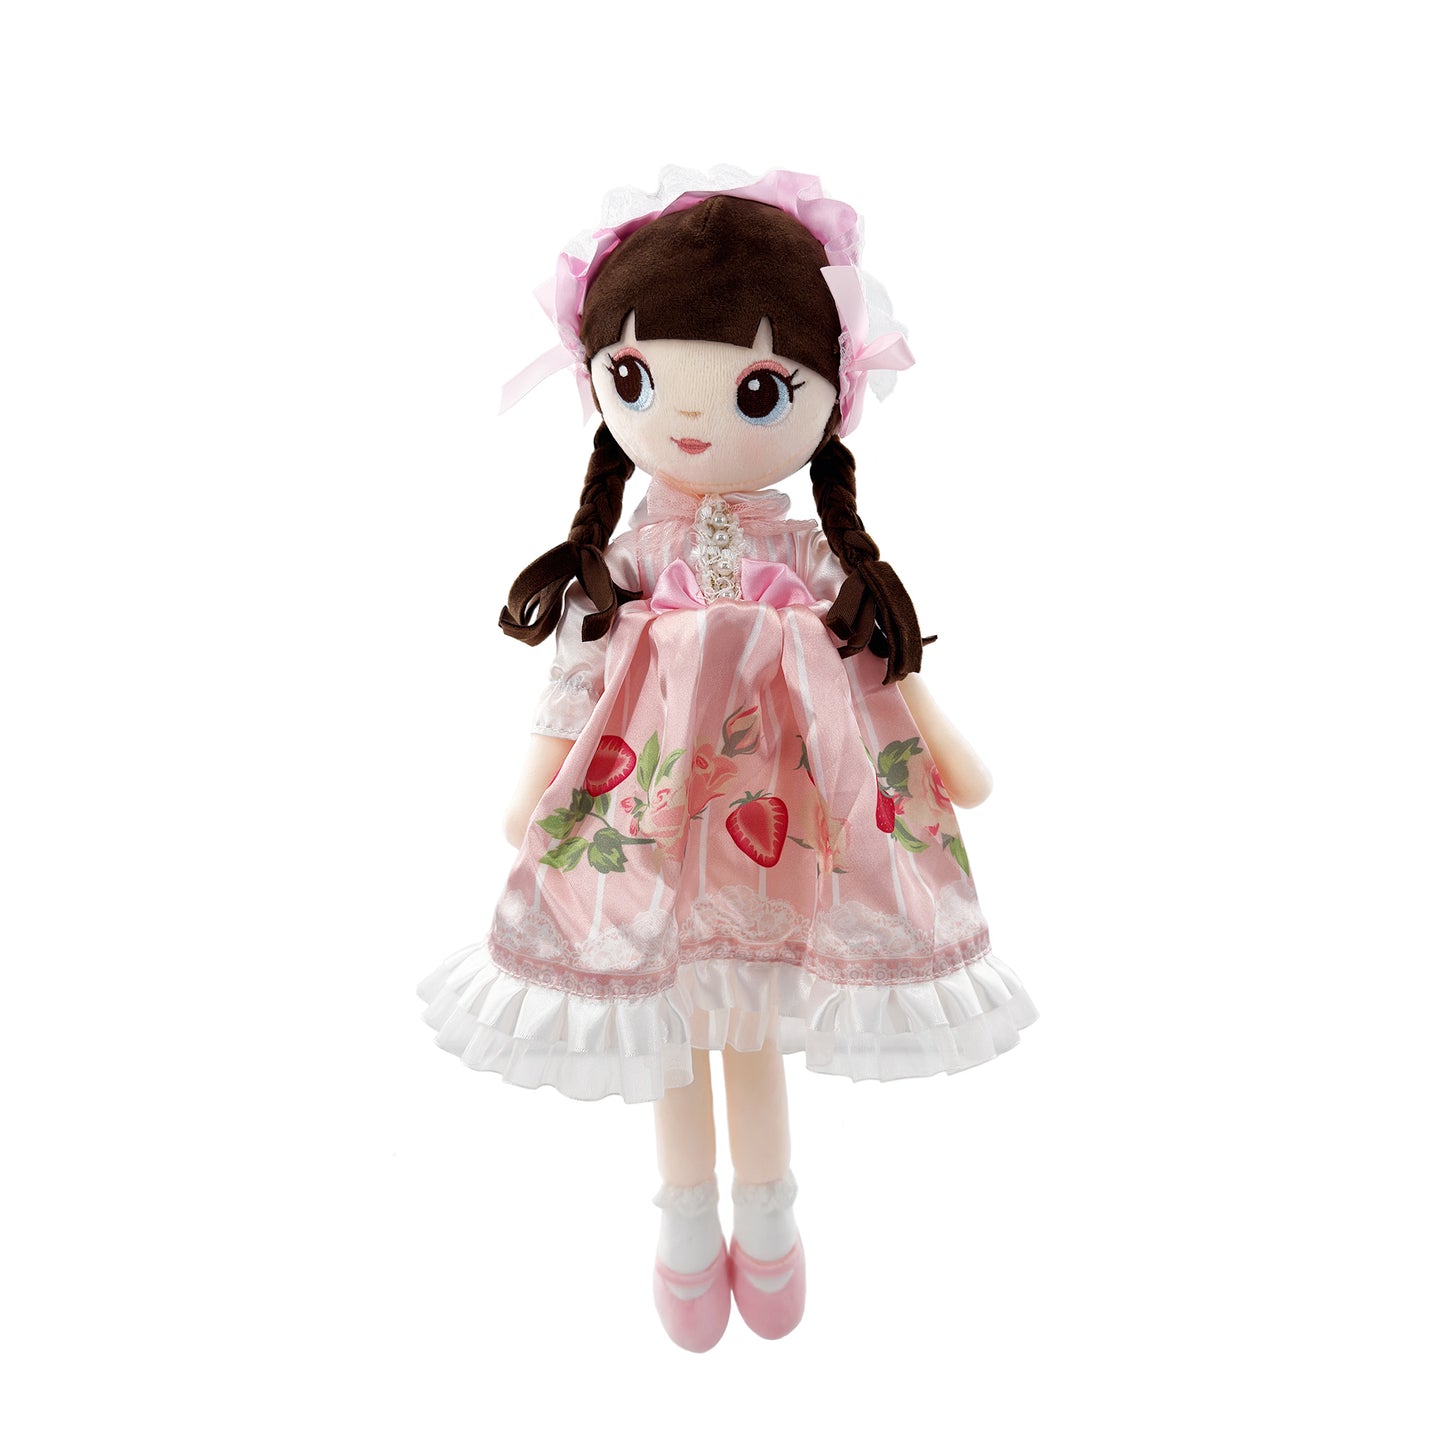 girl in pink dress stuffed animal PlushThis